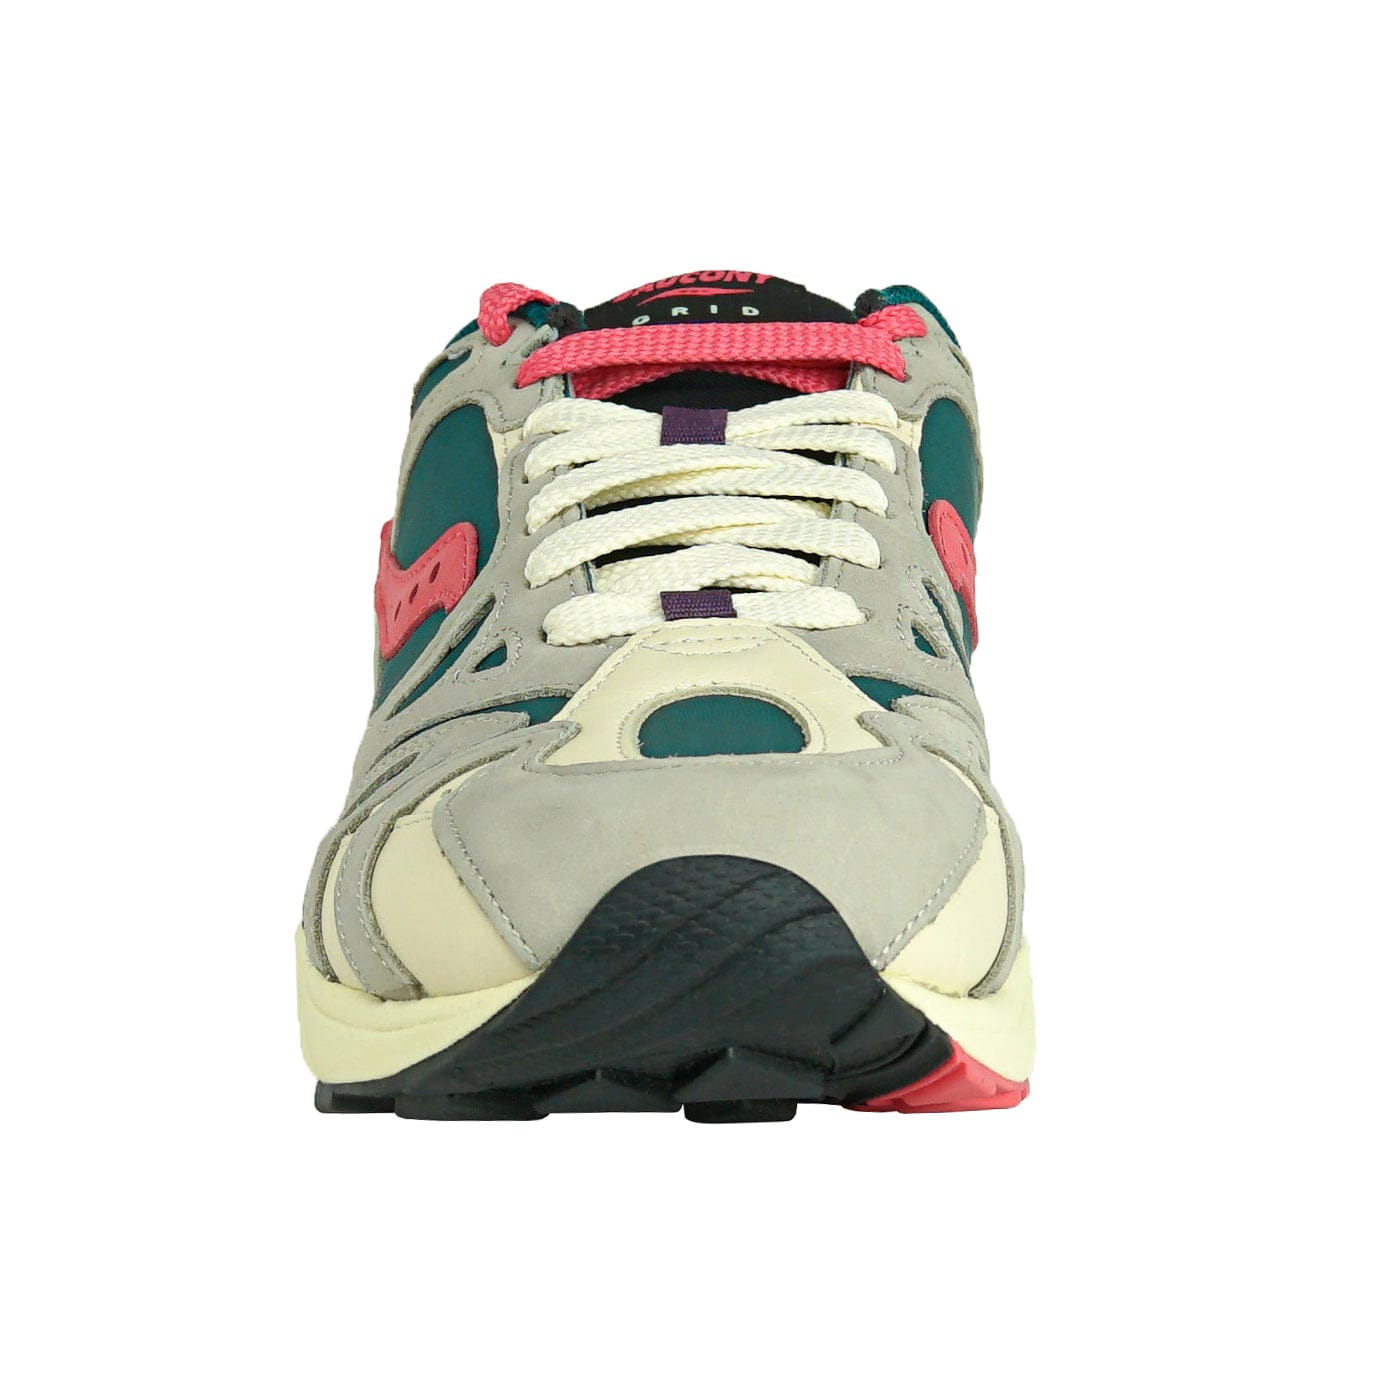 Grid Azura 2000 in beige and green - Saucony - State Of Flux